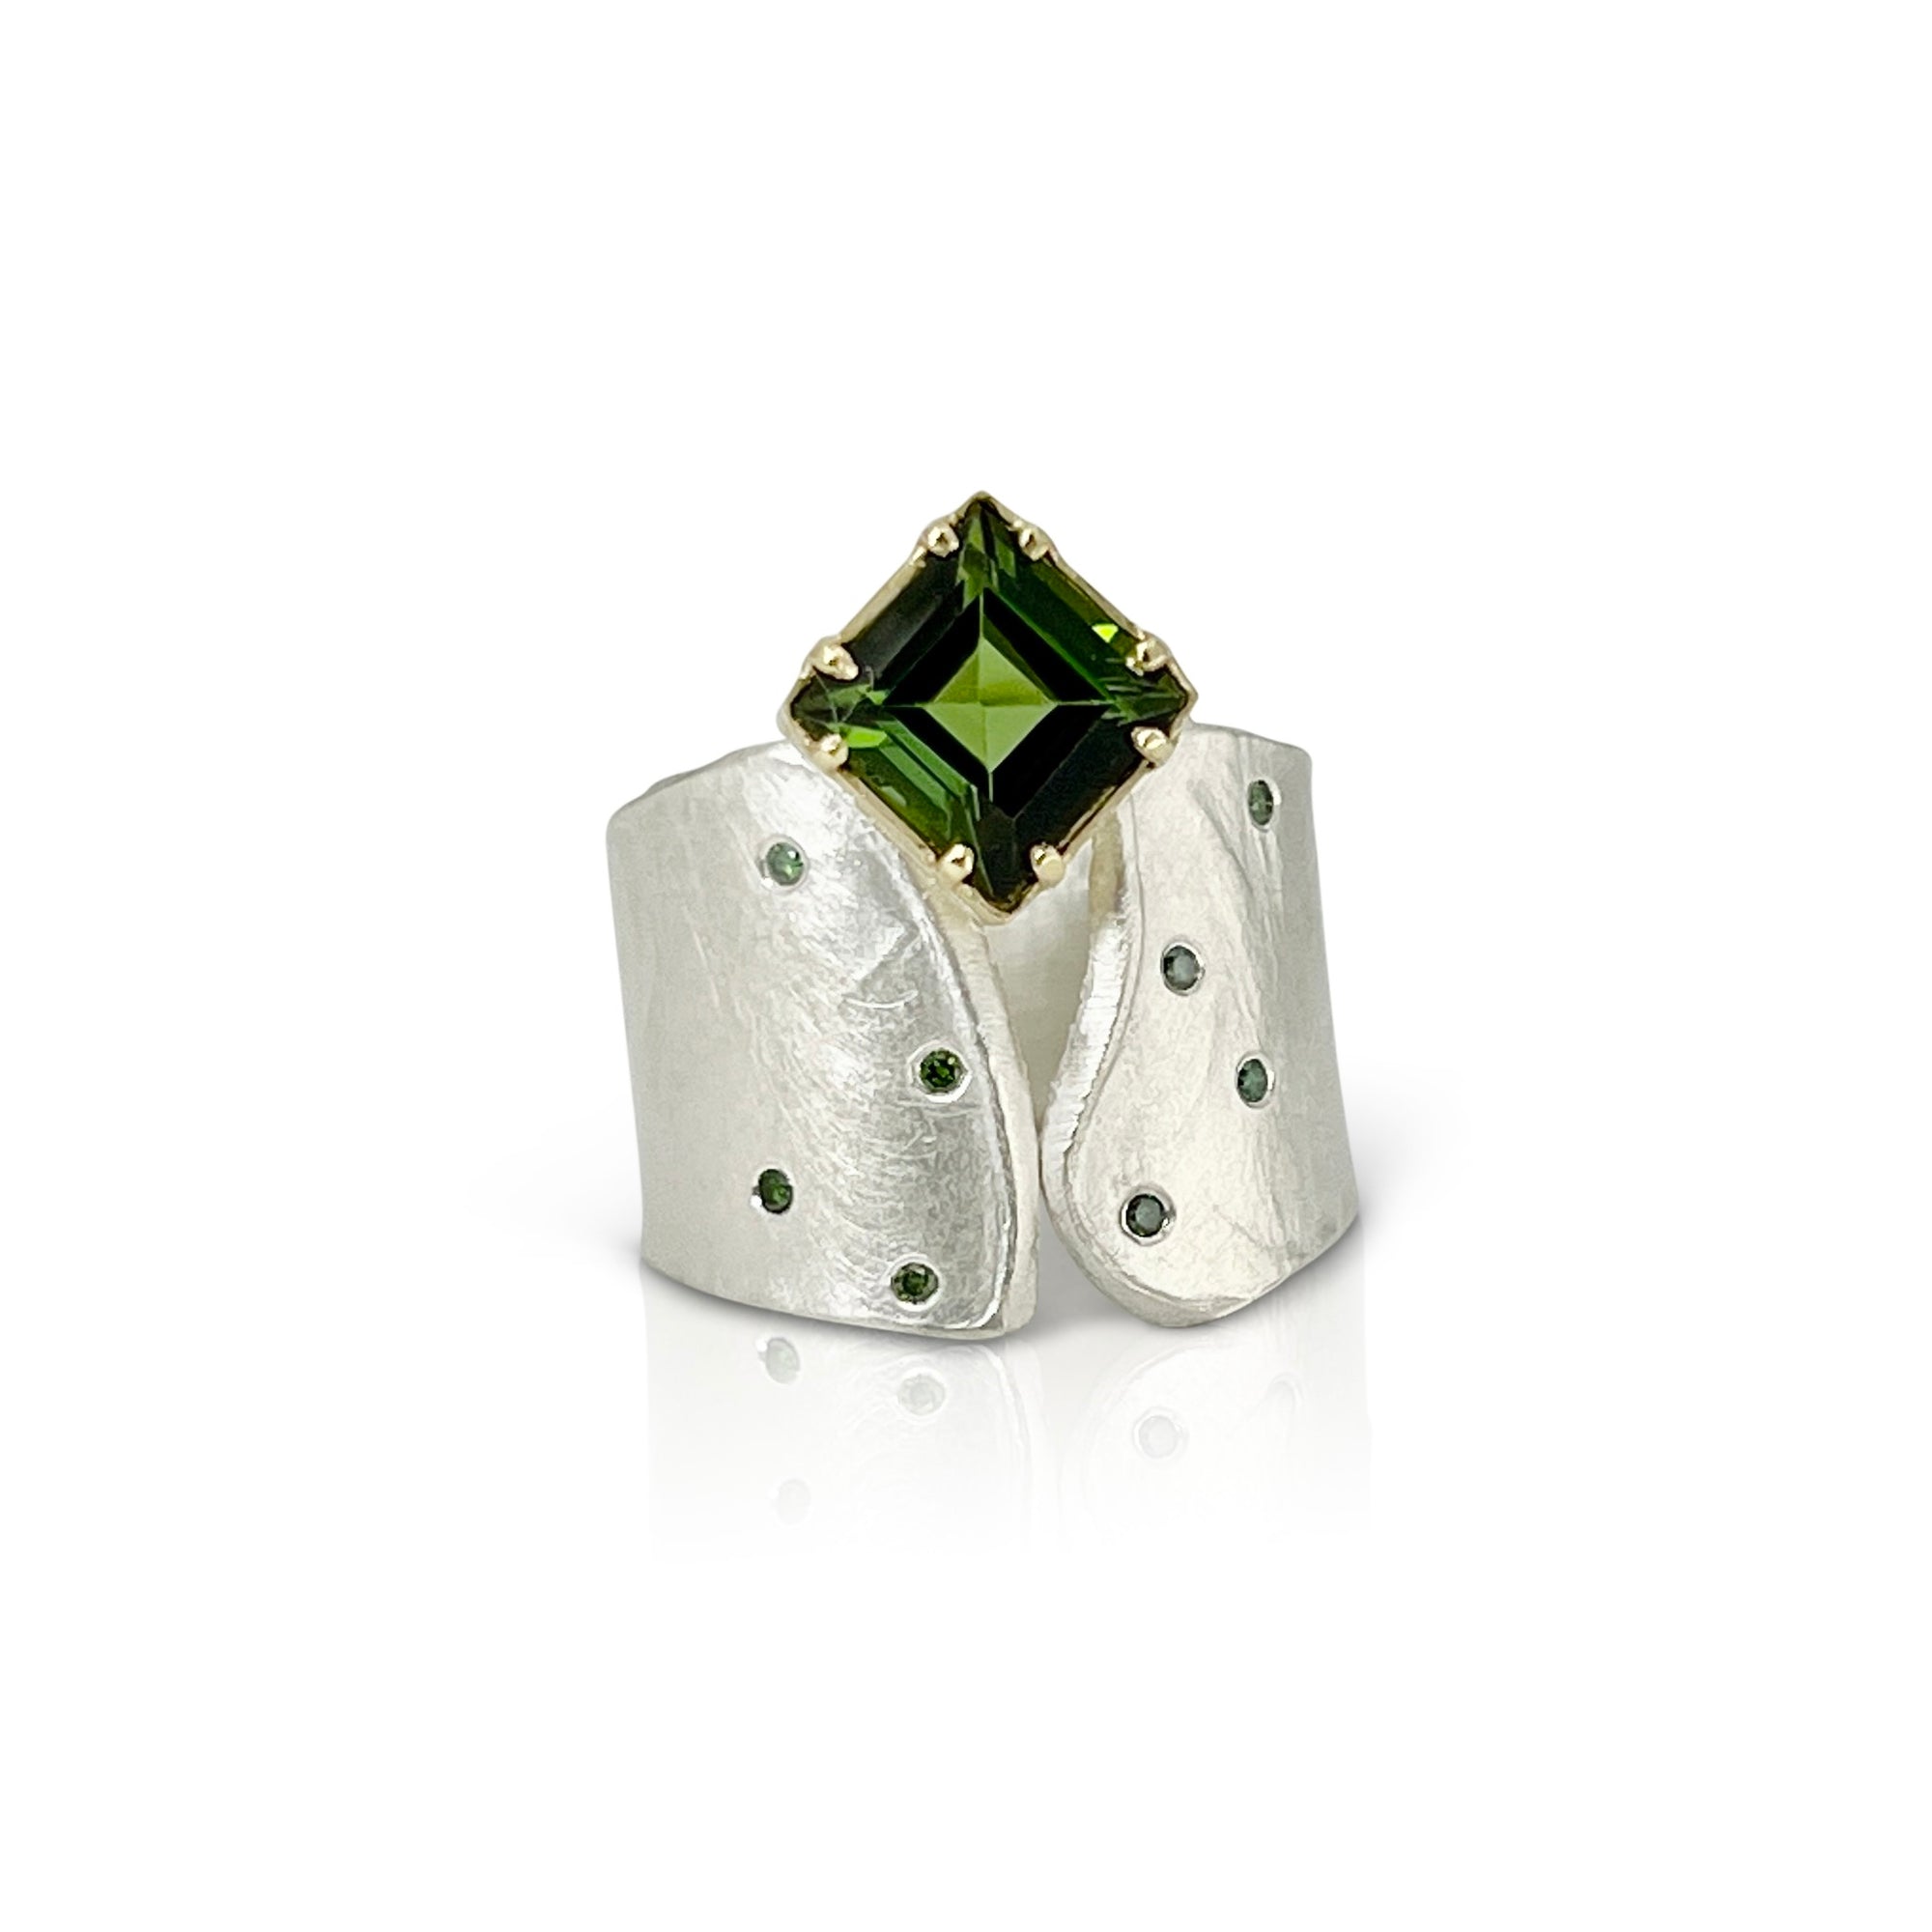 Wafer texture wide ring in sterling silver and 18KY gold with princess cut tourmaline and green diamonds made by Ayesha Mayadas